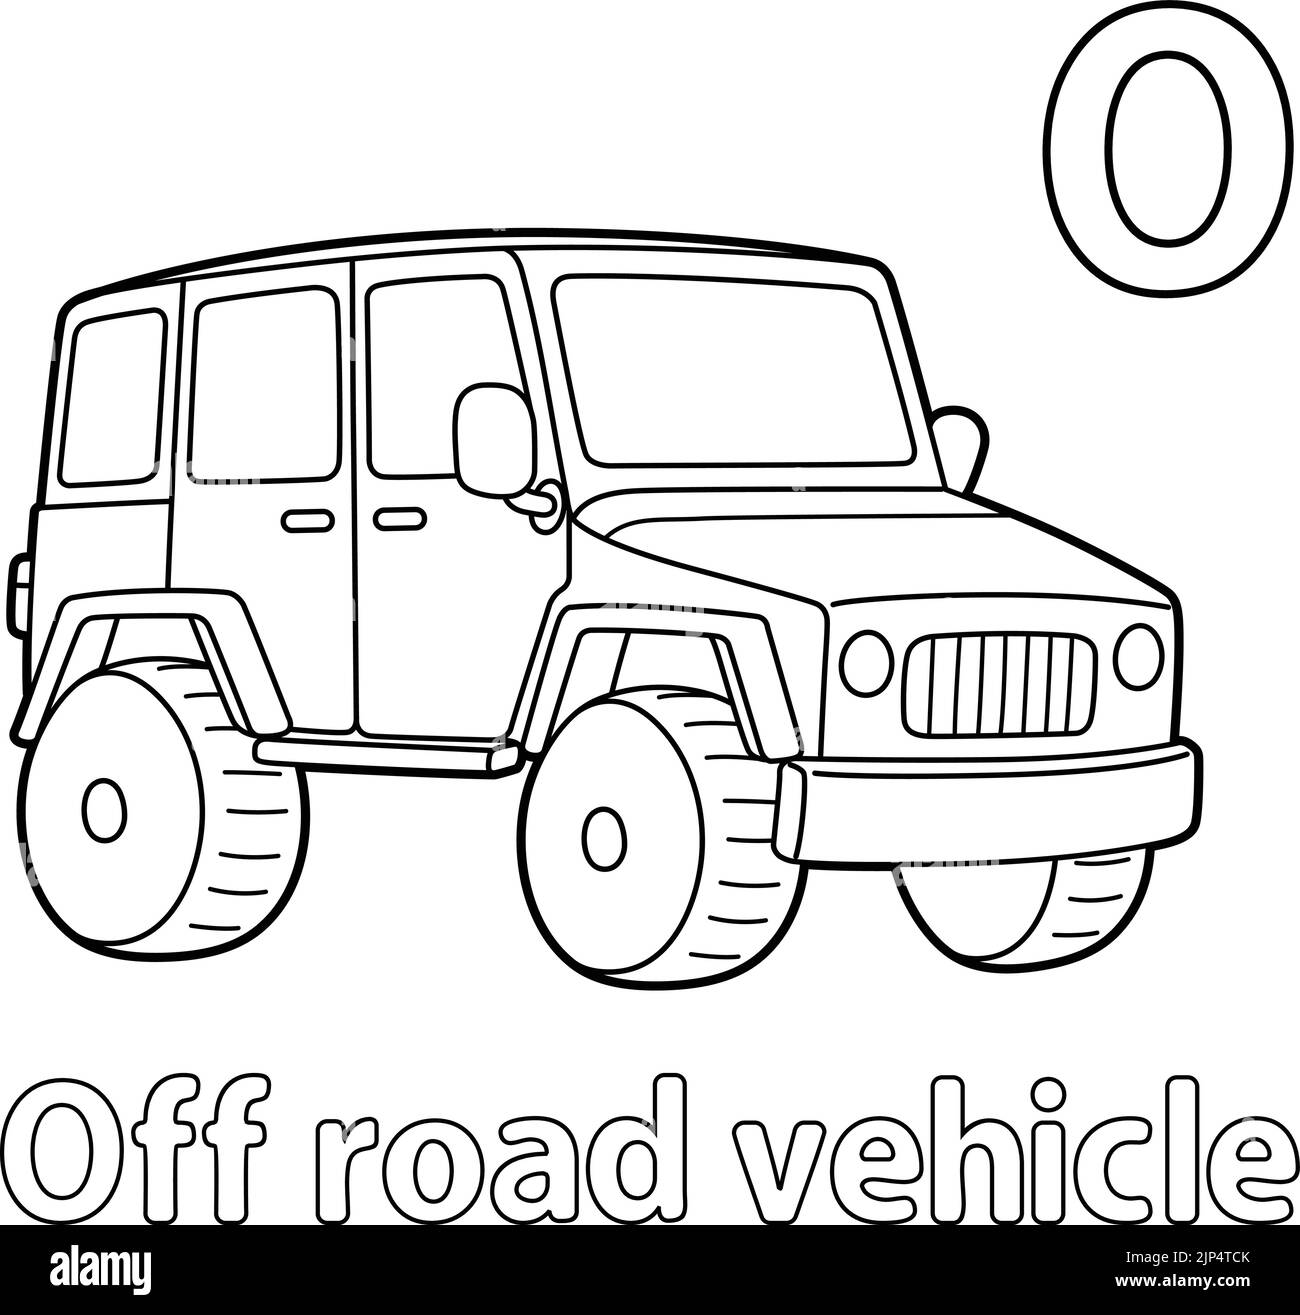 Off-Road Vehicle Alphabet ABC Coloring Page O Stock Vector